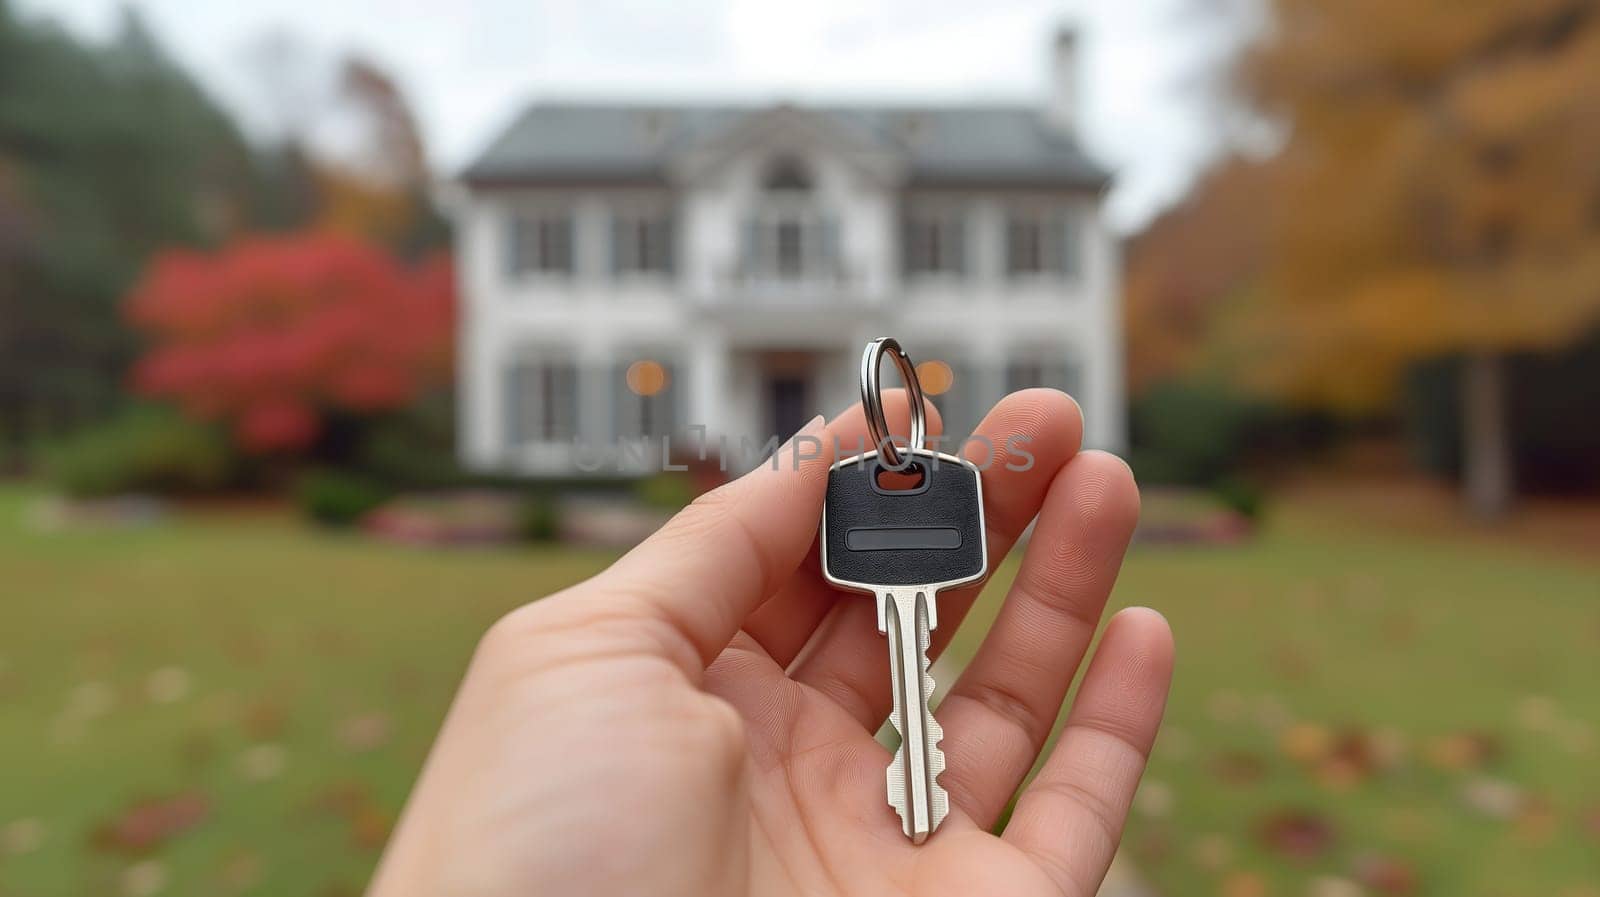 Hand holding keys in front of new house by z1b